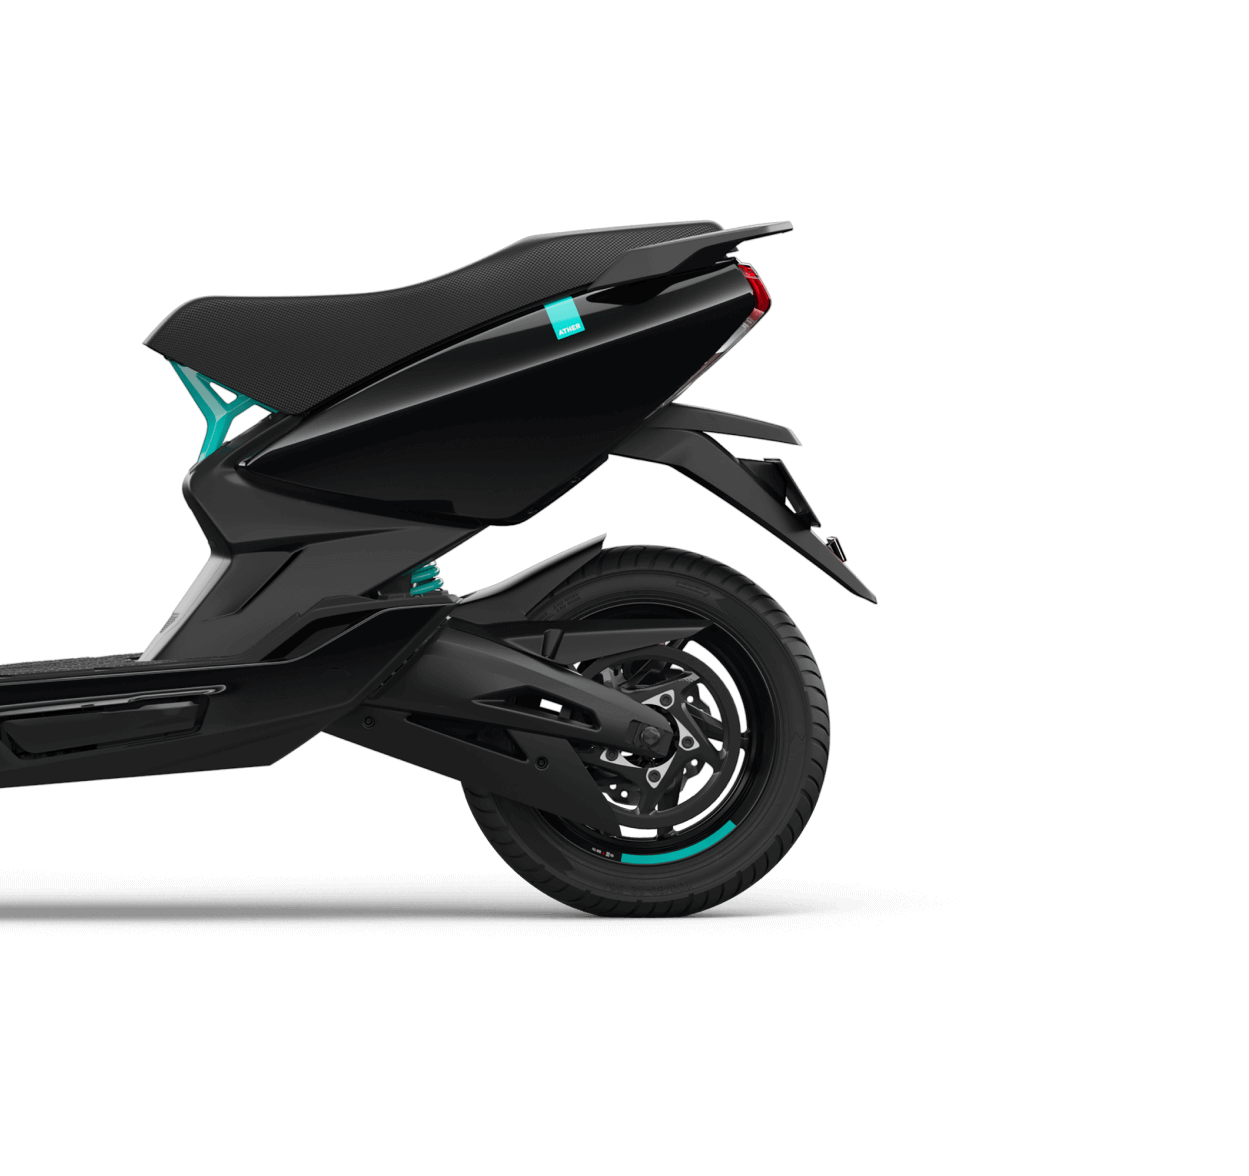 ather electric scooter cosmic black colour